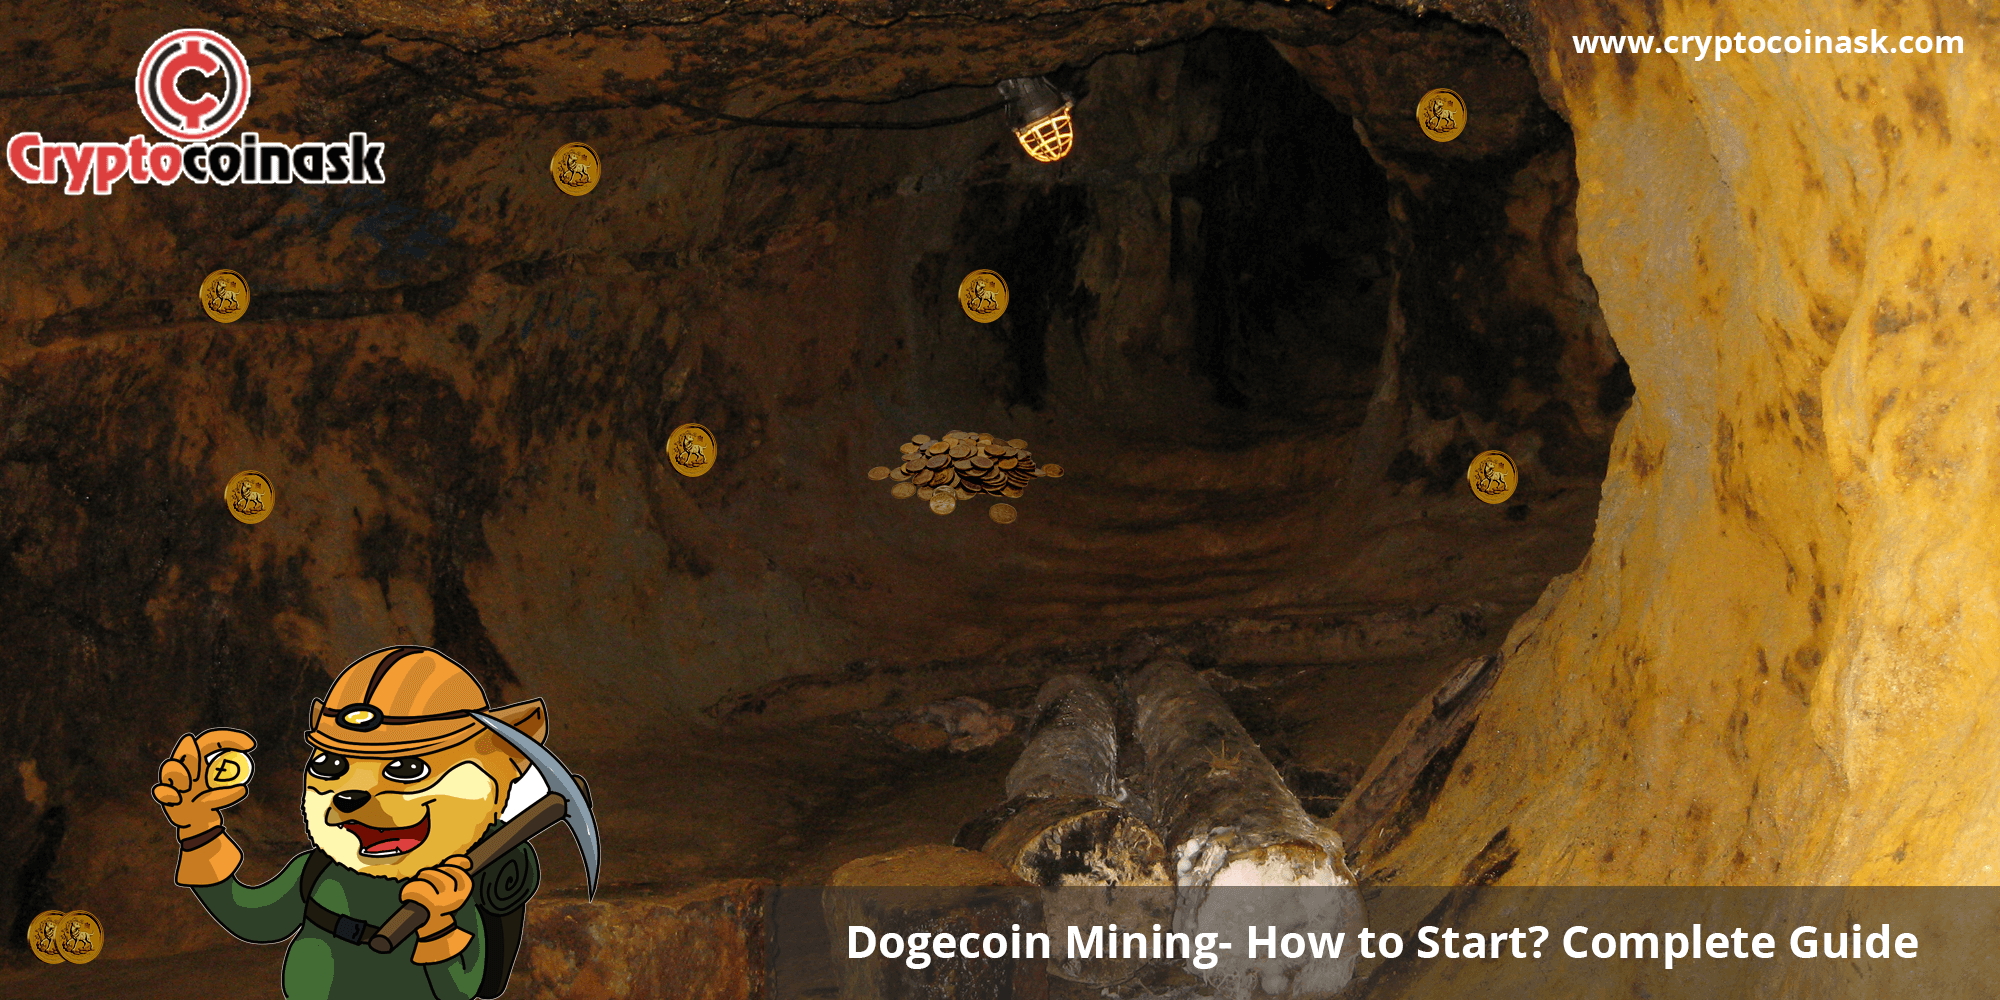 Dogecoin Mining: How to Start? Complete Guide 2019